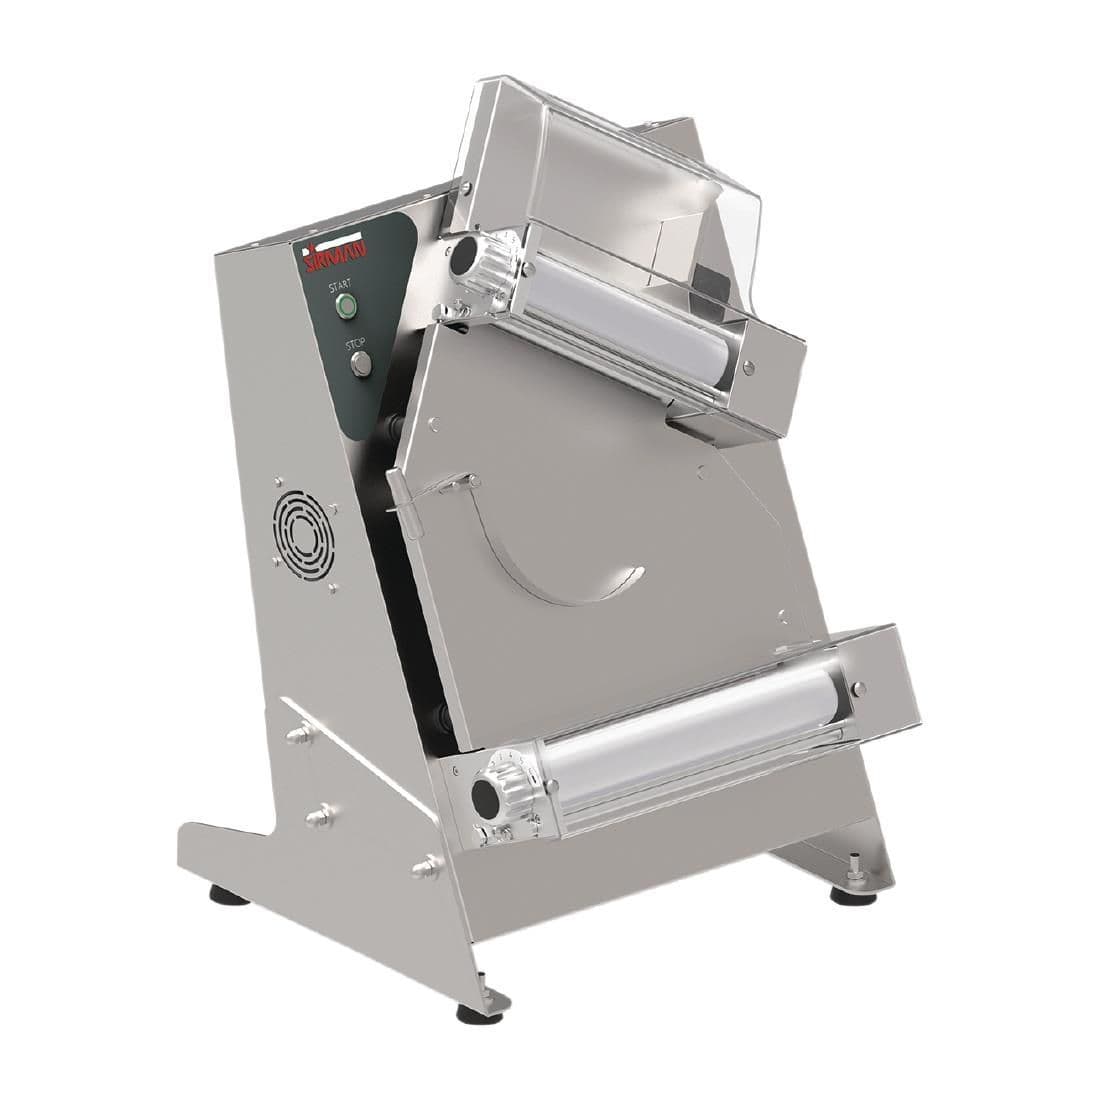 CW420 Sirman Pizza Dough Roller 320 JD Catering Equipment Solutions Ltd